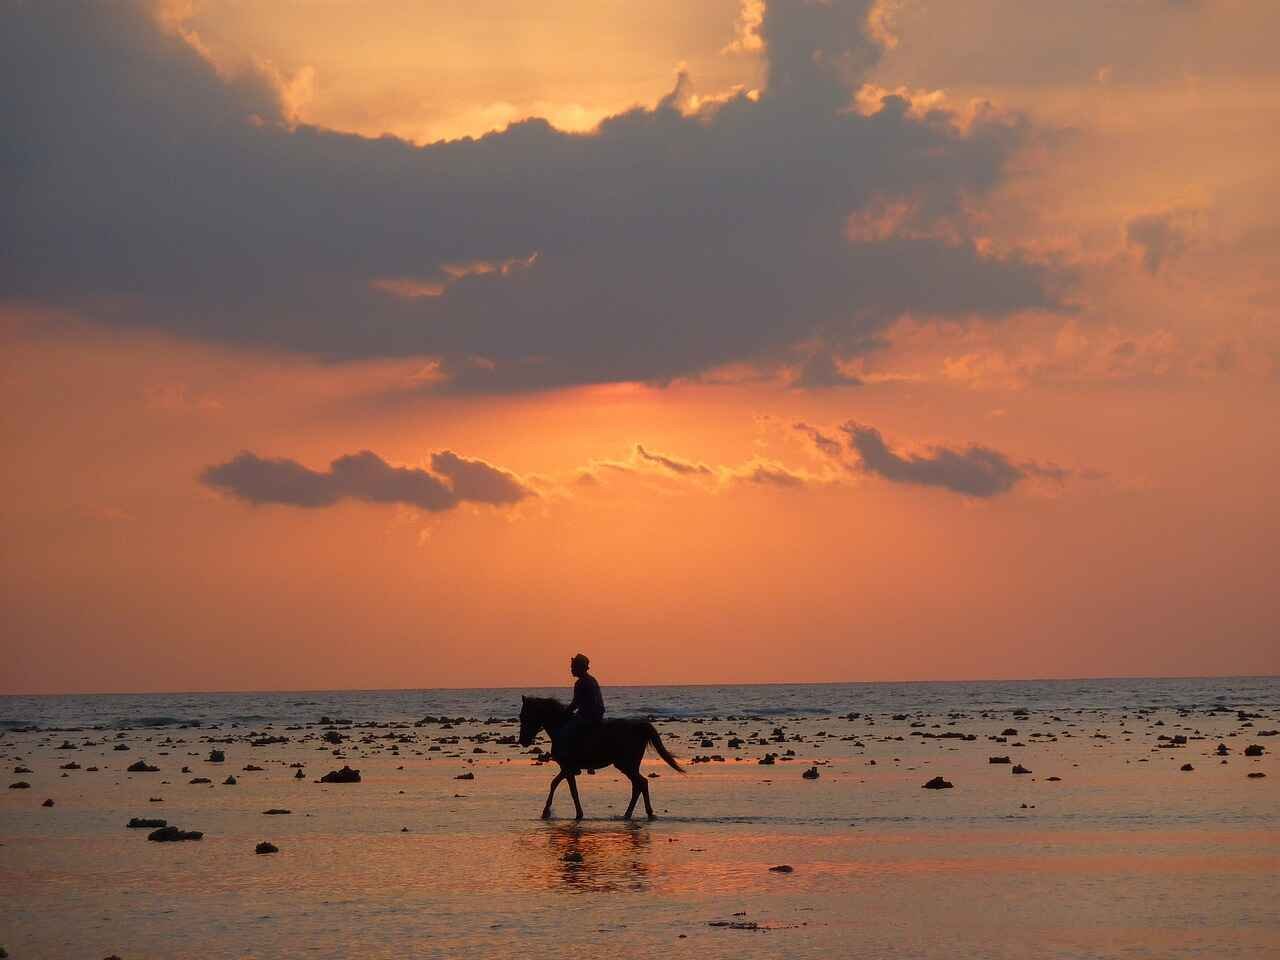 Horse riding in Bali